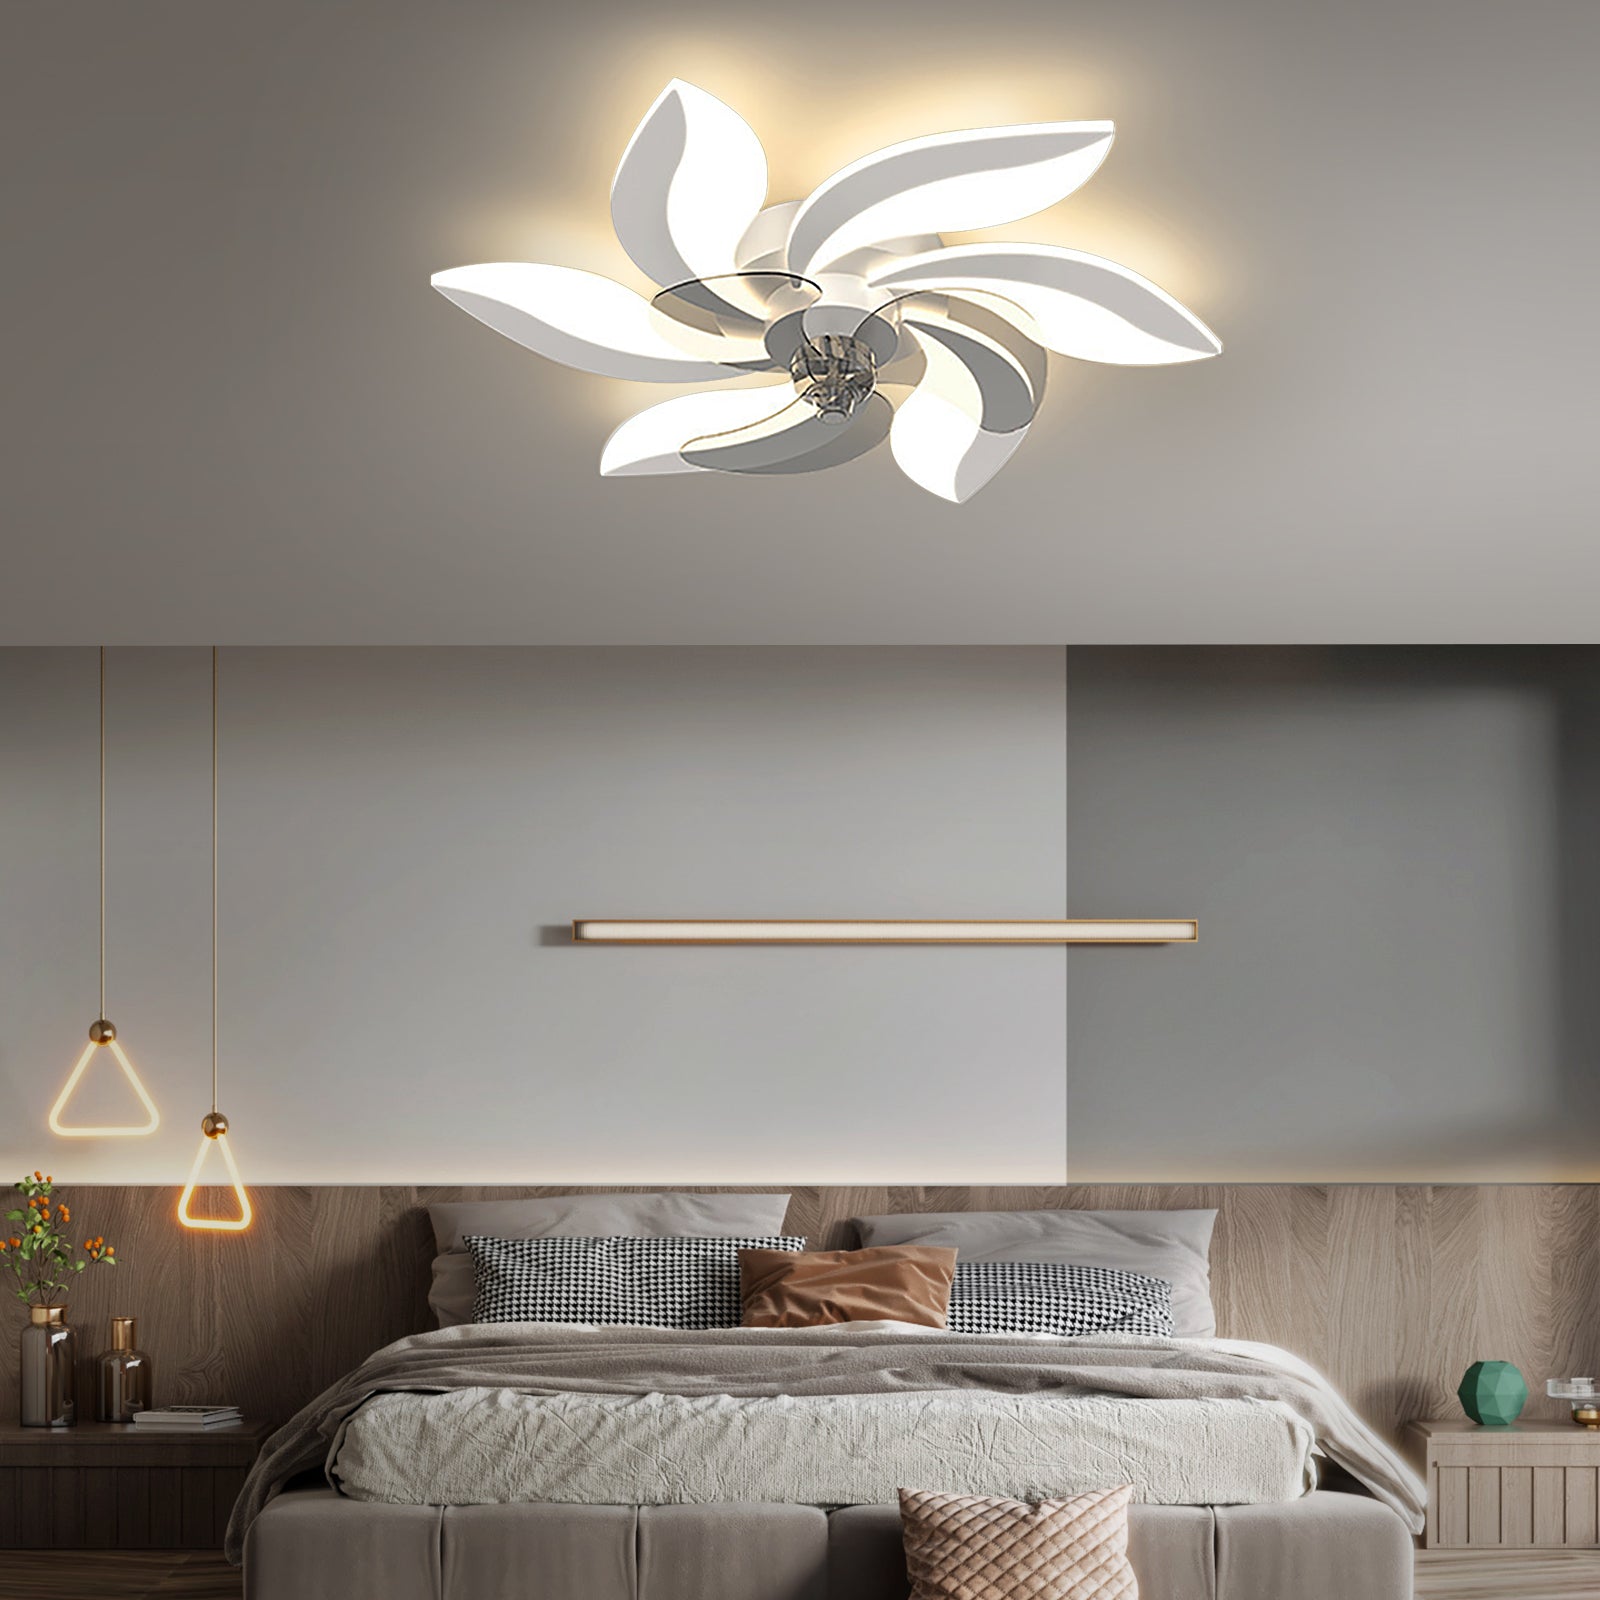 Modern 30.7 Inch LED Ceiling Fan with Remote Control Three Speed Dimming and Three Speed Wind Control Function for Bedroom Study Living Room and Children's Room REYDELUZ